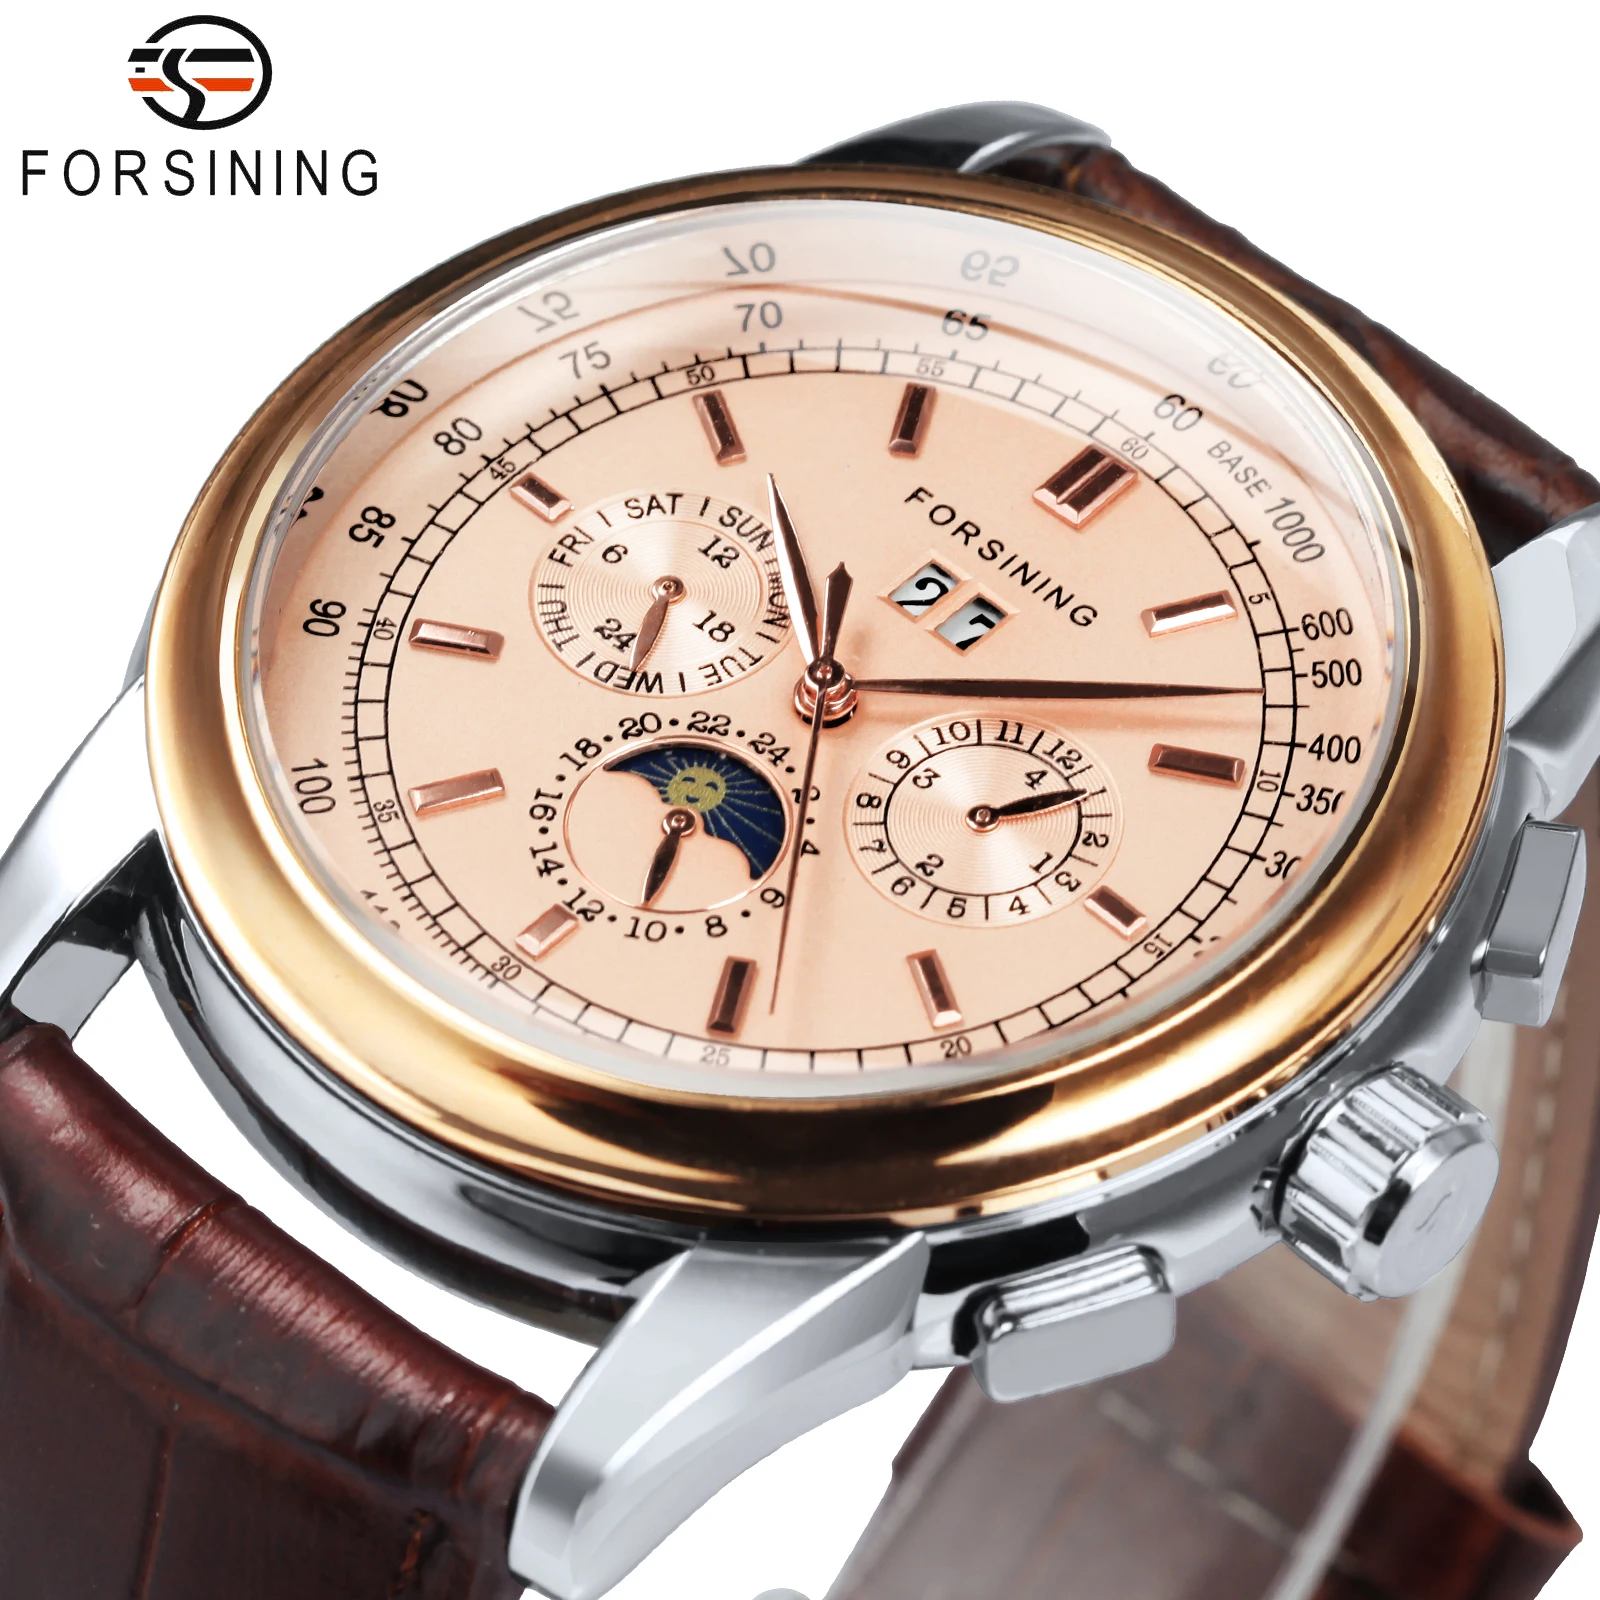 

Forsining Luxury Vintage Automatic Watch for Men Classic Rose Gold Moon Phase Calendar Dial Mechanical Watches Genuine Leather